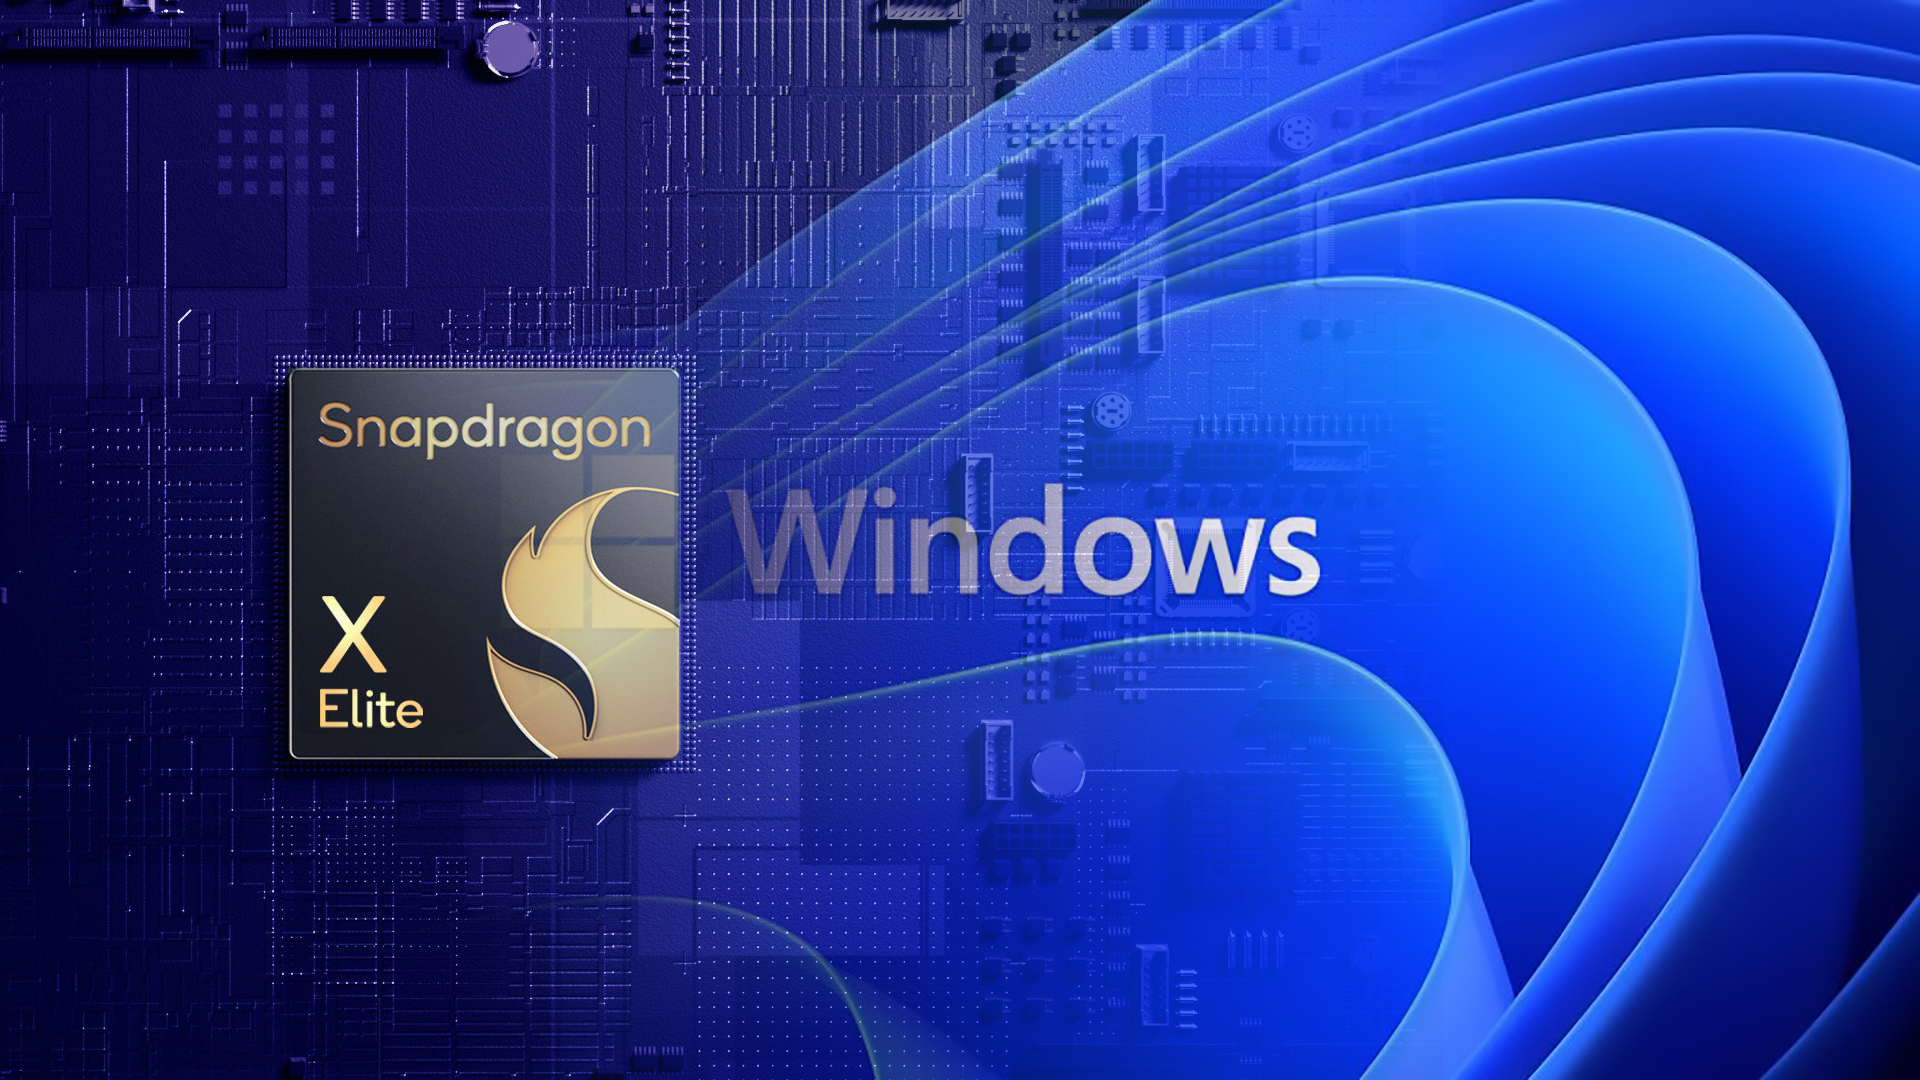 Windows 12 – a new chapter in personal computing, Qualcomm reportedly tested the OS on a new ARM chip